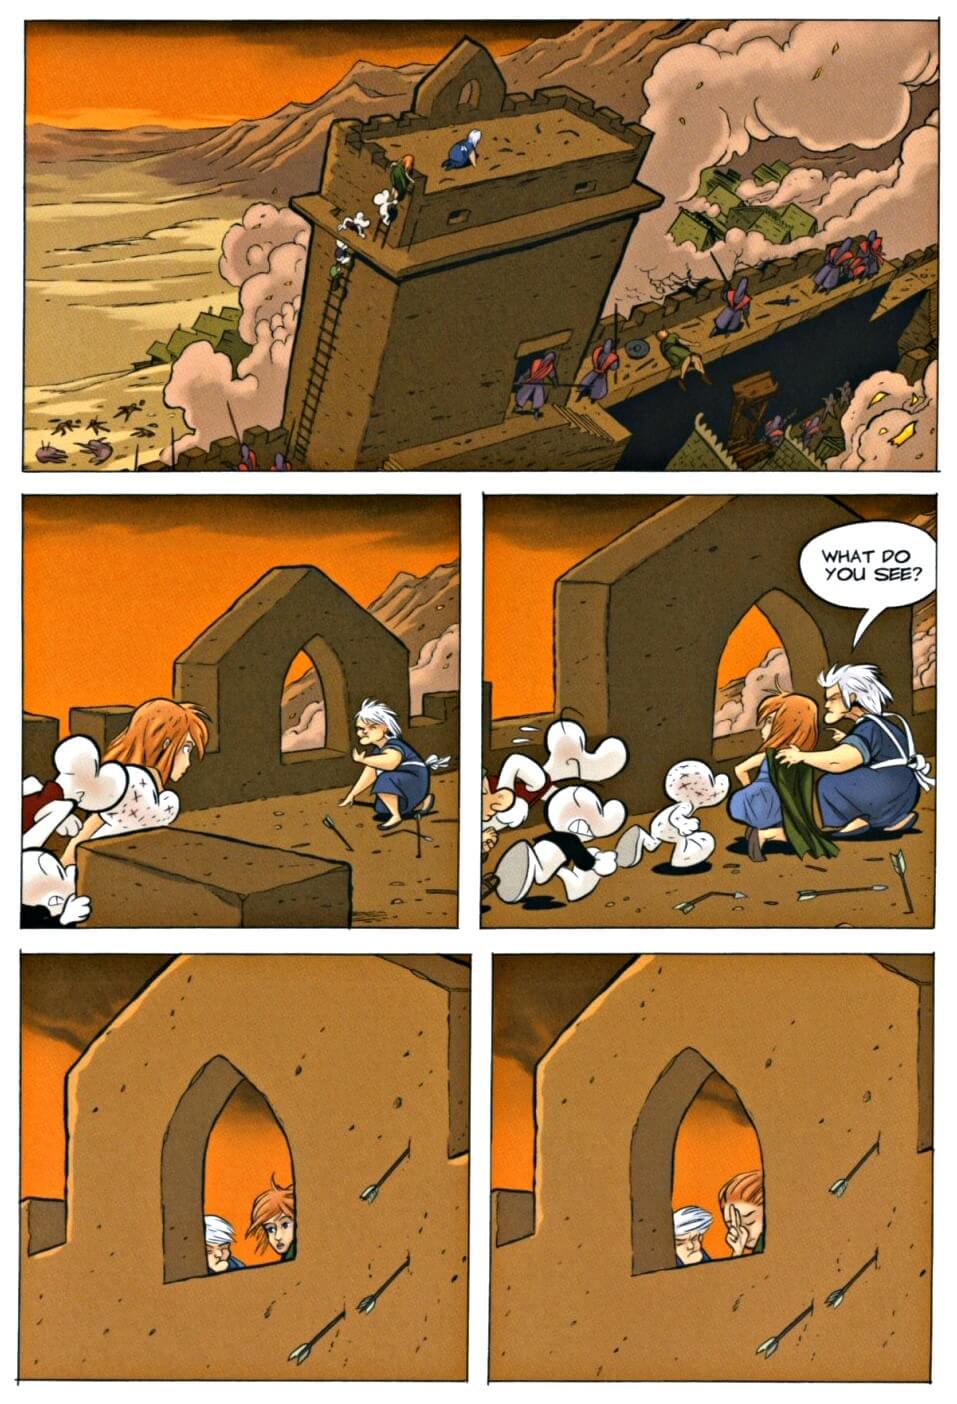 page 59 chapter 3 of bone 9 crown of horns graphic novel